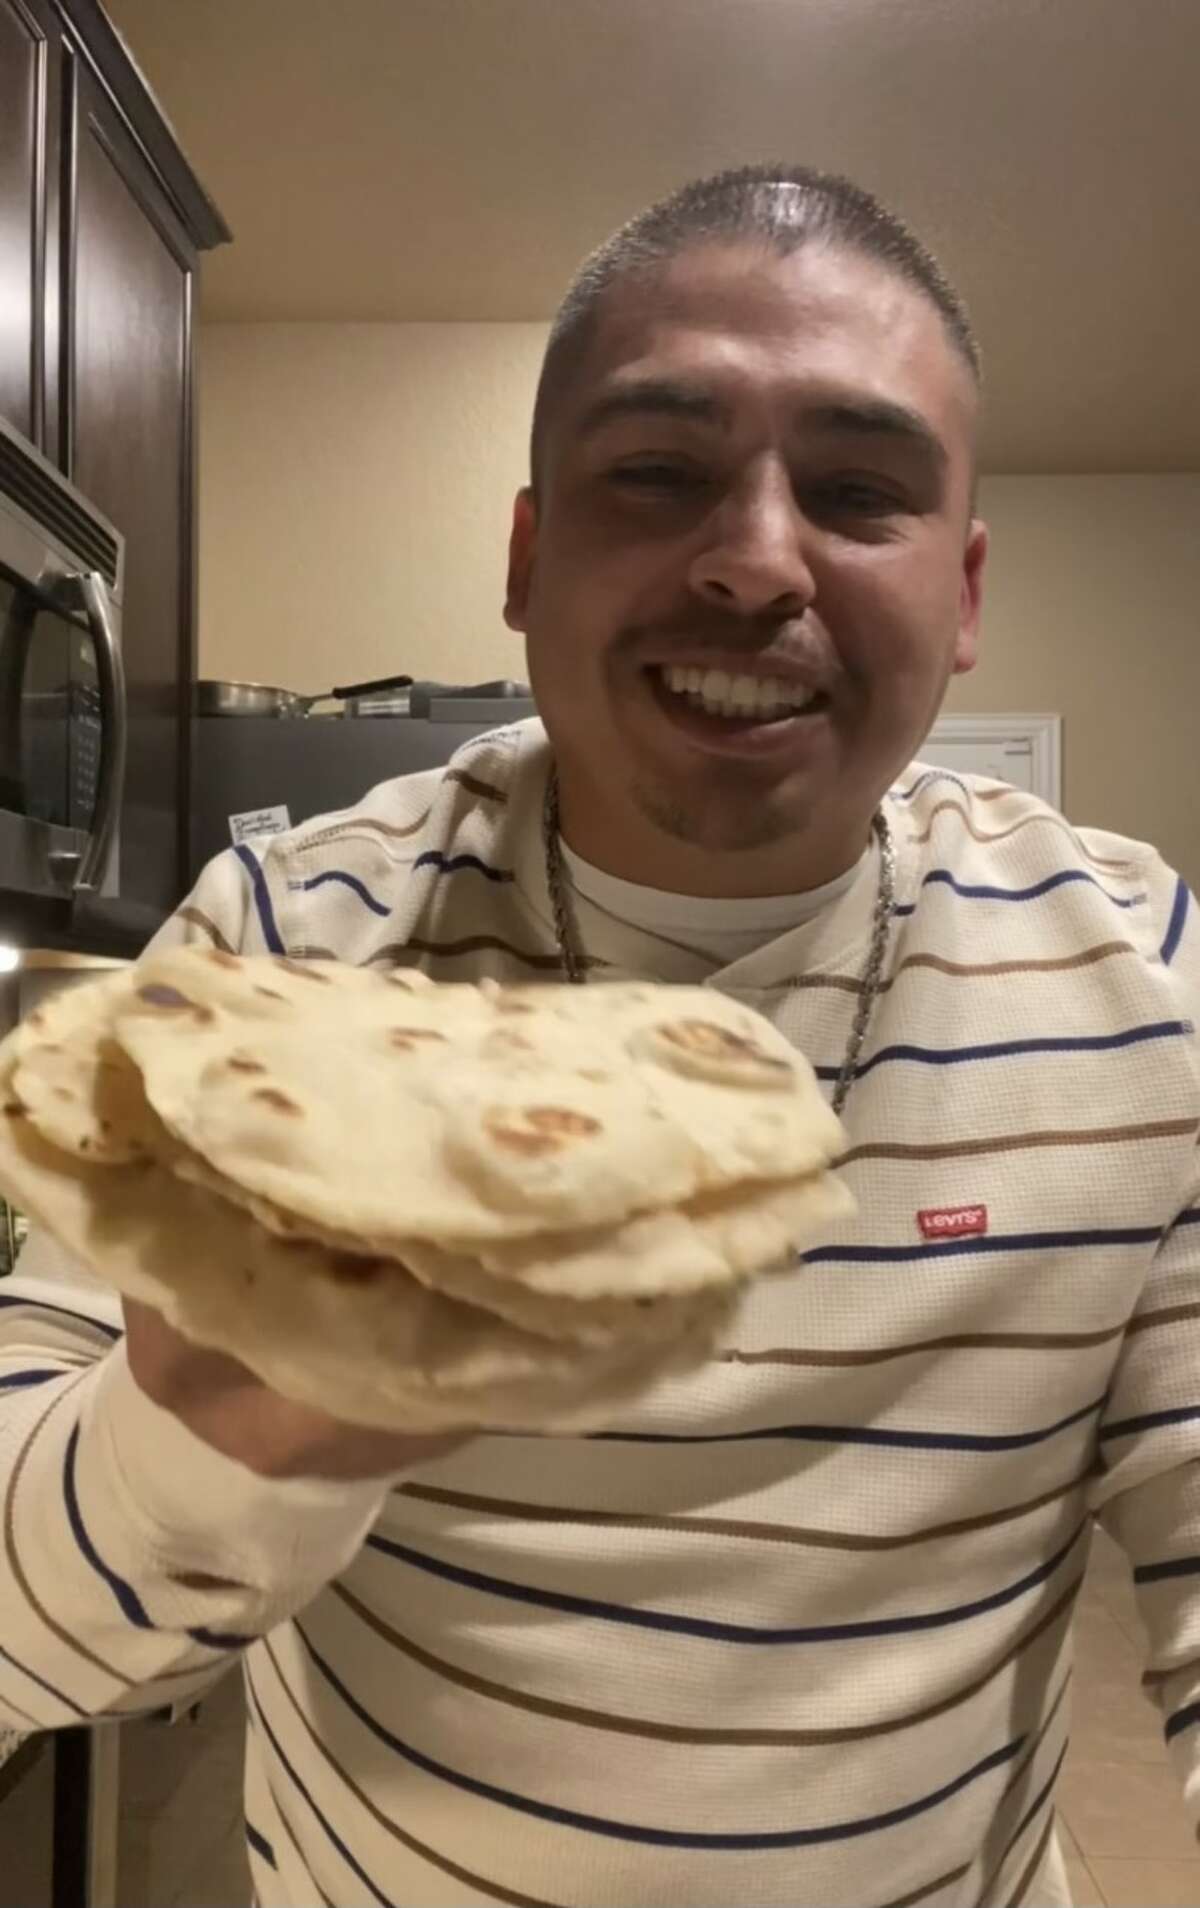 Jerry Yguerabide wasn’t sure what charcuterie was when he started his culinary career 10 years ago, now he’s signing deals with H-E-B, collaborating with Buzzfeed and working on his own restaurant thanks to legion of more than 600,000 TikTok followers who know him as the expert on everything from chorizo-flavored tortillas to lemon blueberry biscuits.